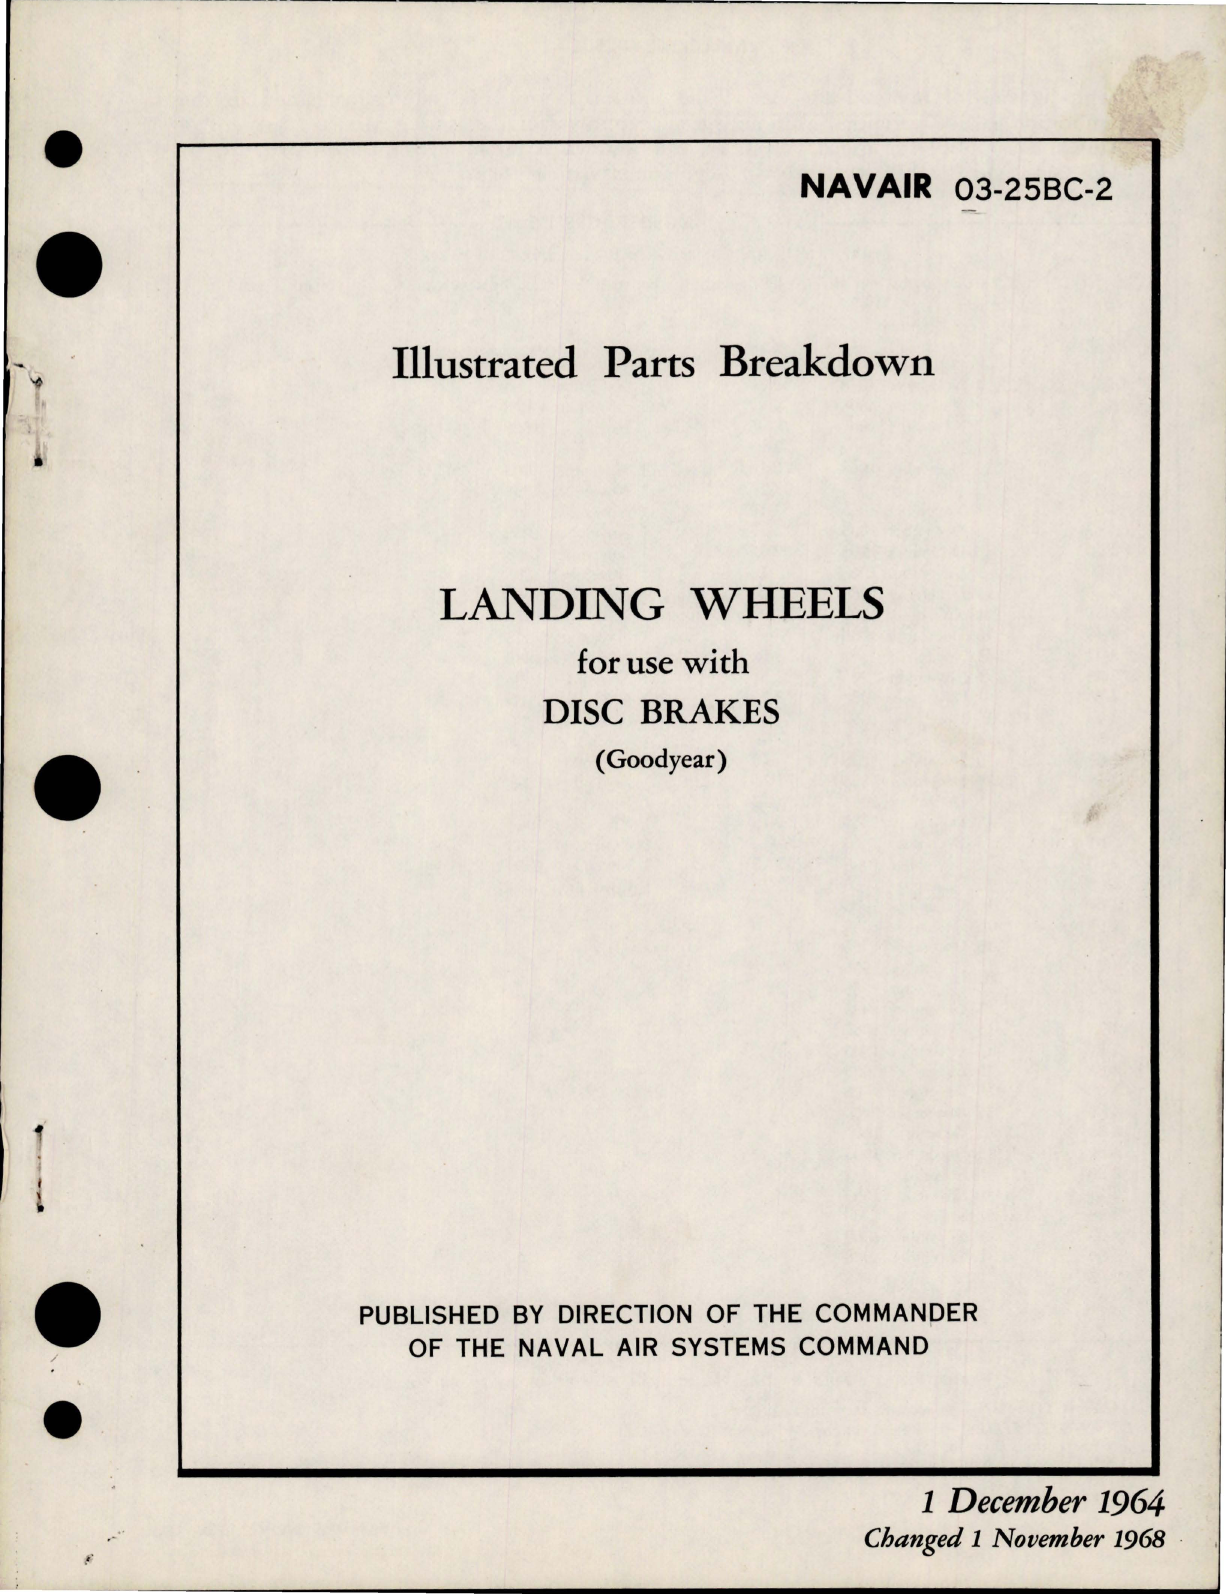 Sample page 1 from AirCorps Library document: Illustrated Parts Breakdown for Landing Wheels for use with Disc Brakes 